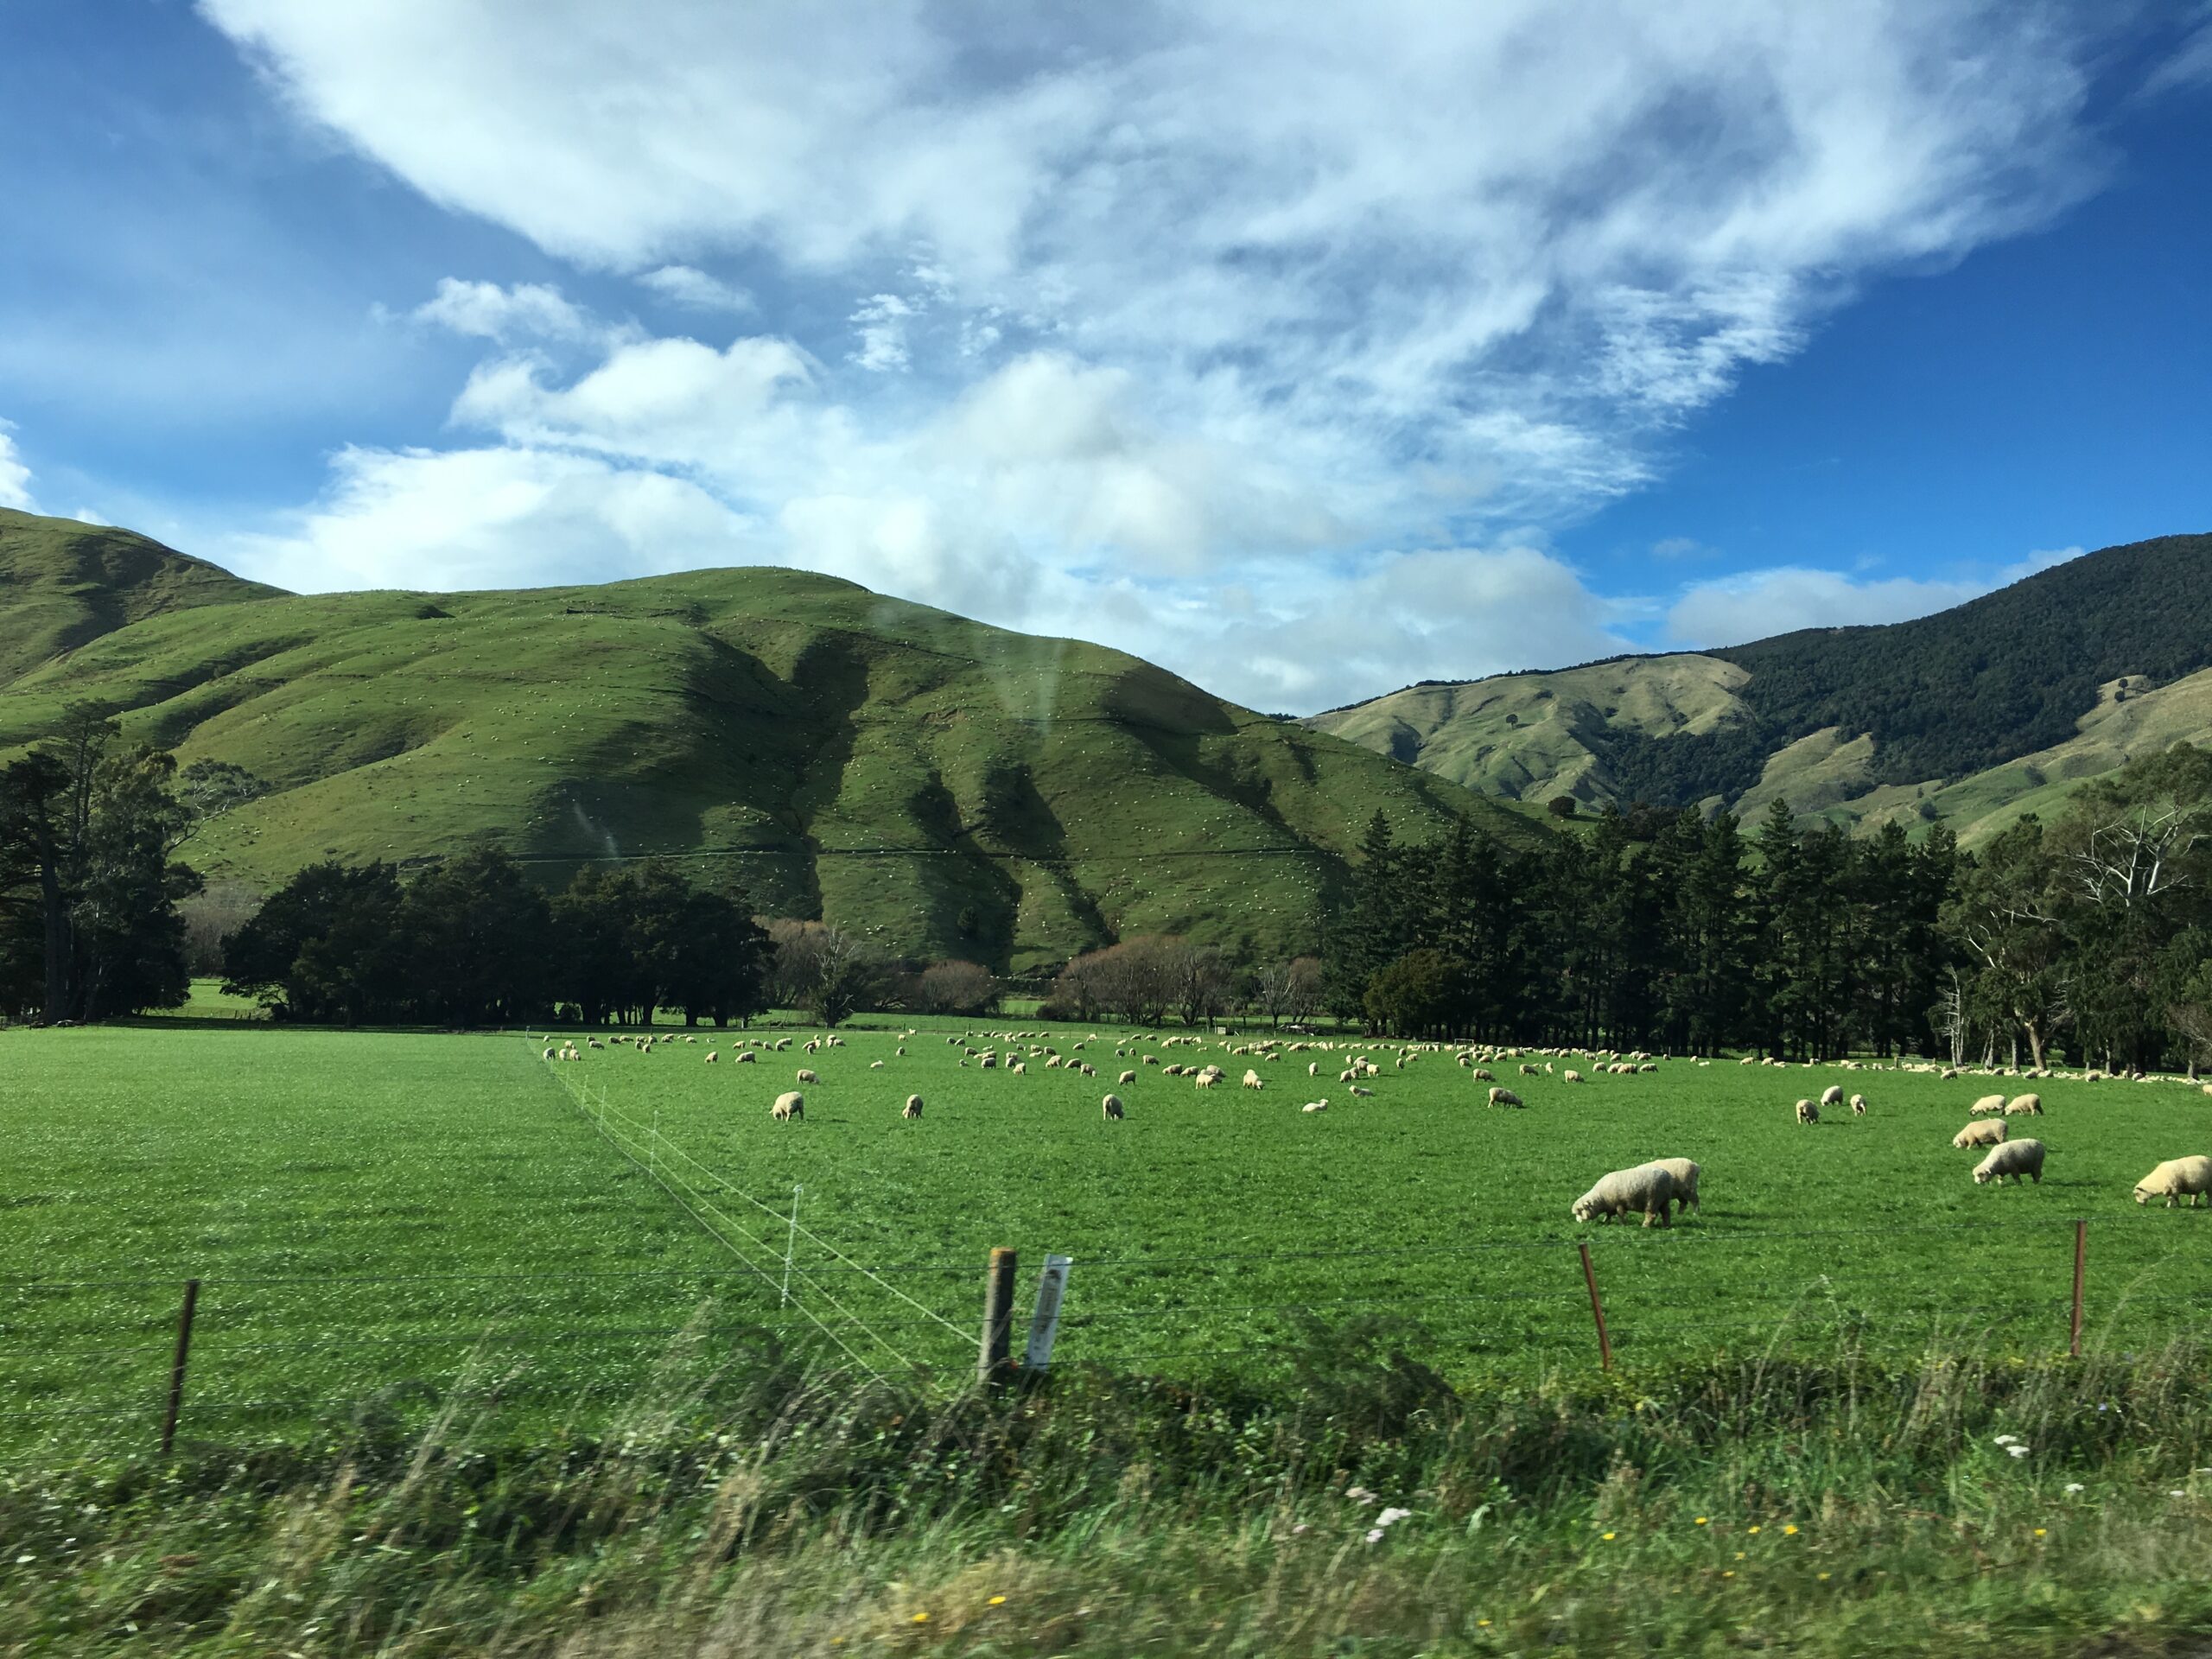 The Fun of Driving in New Zealand, Field of Sheep